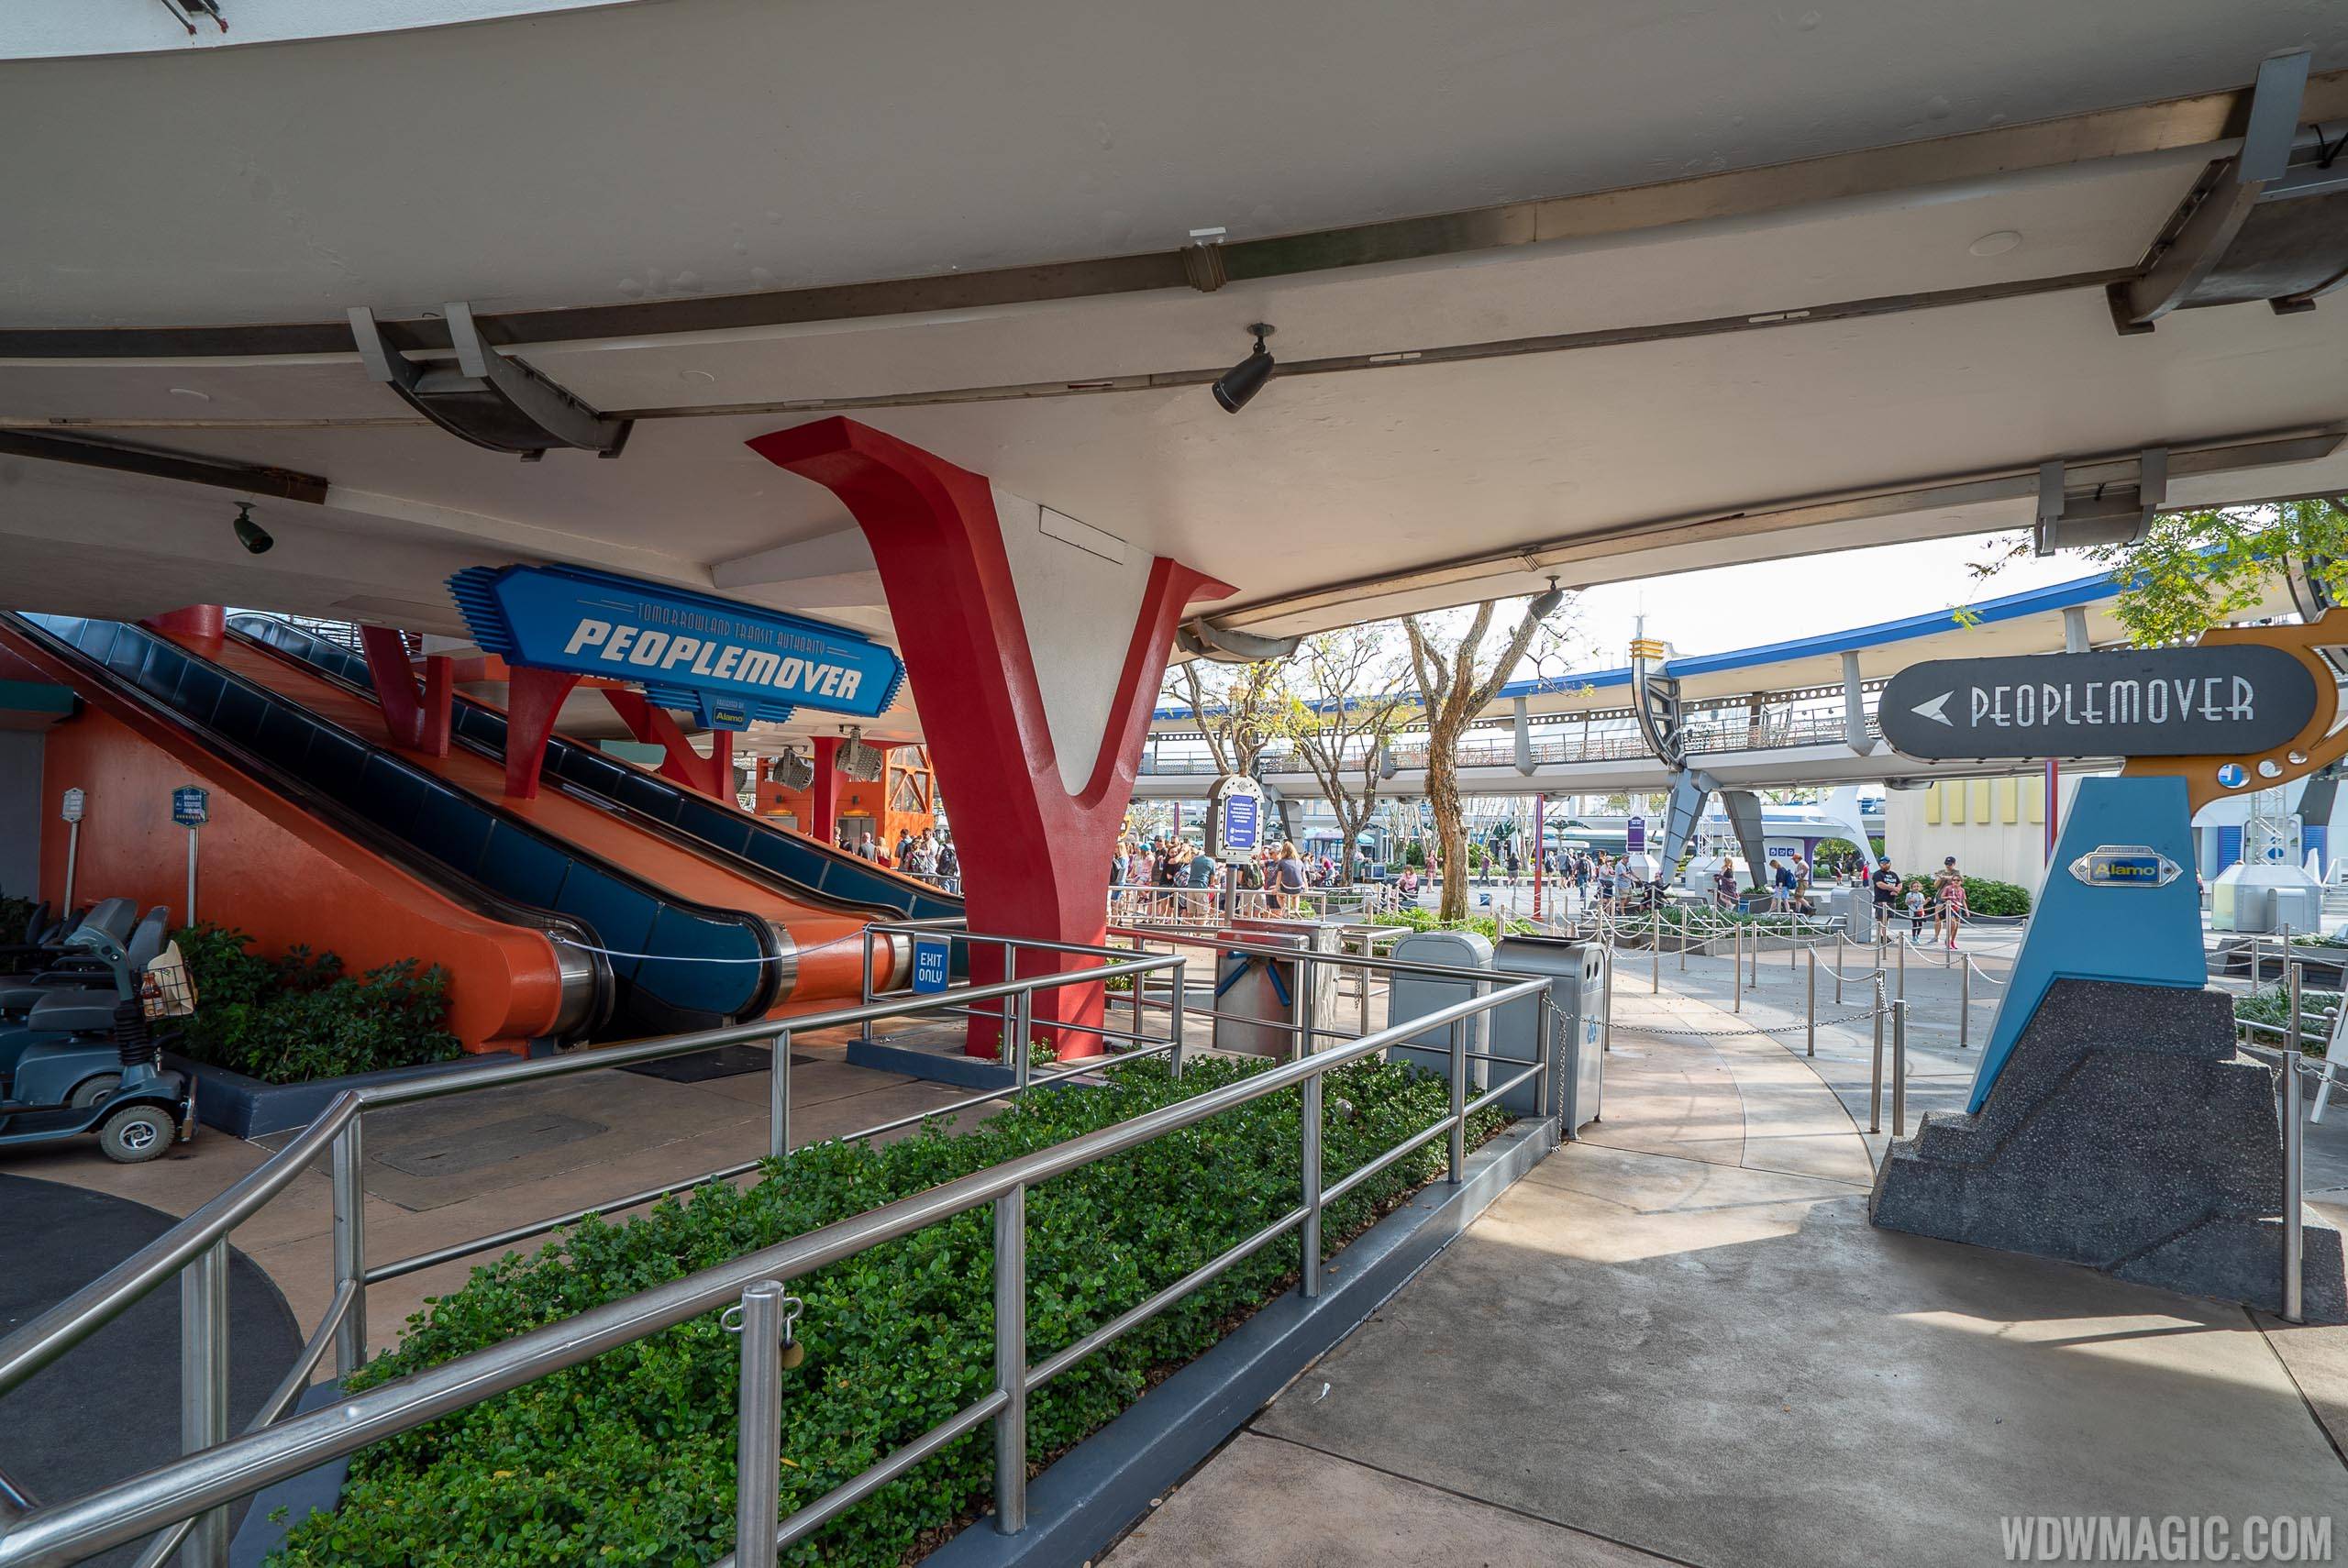 Tomorrowland Transit Authority PeopleMover closed